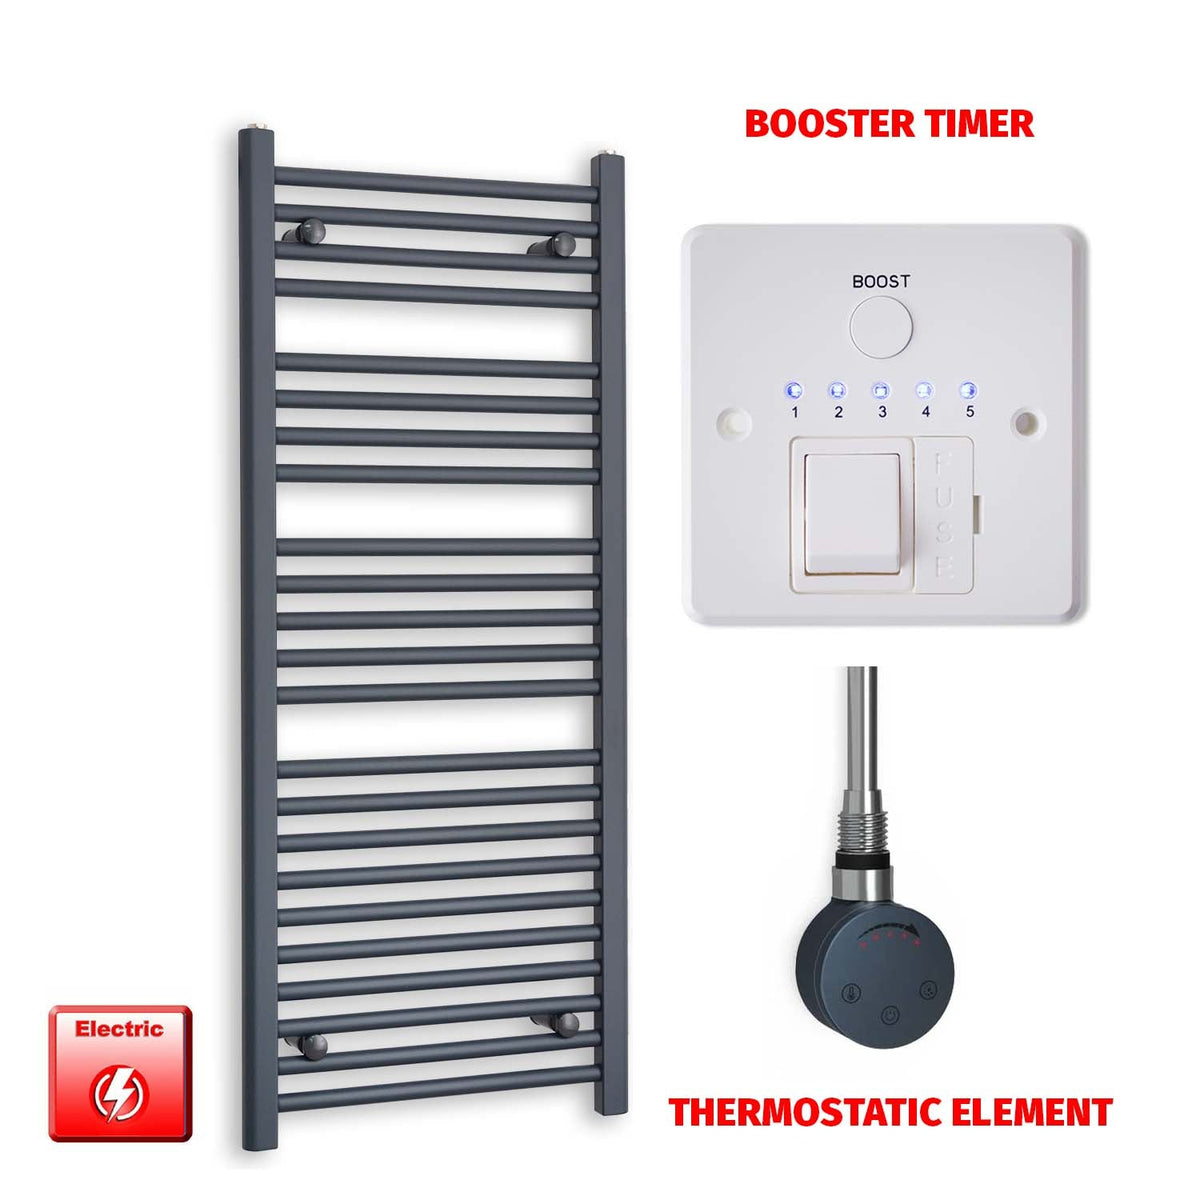 1200mm High 500mm Wide Flat Anthracite Pre-Filled Electric Heated Towel Rail Radiator HTR SMR Thermostatic element Booster timer